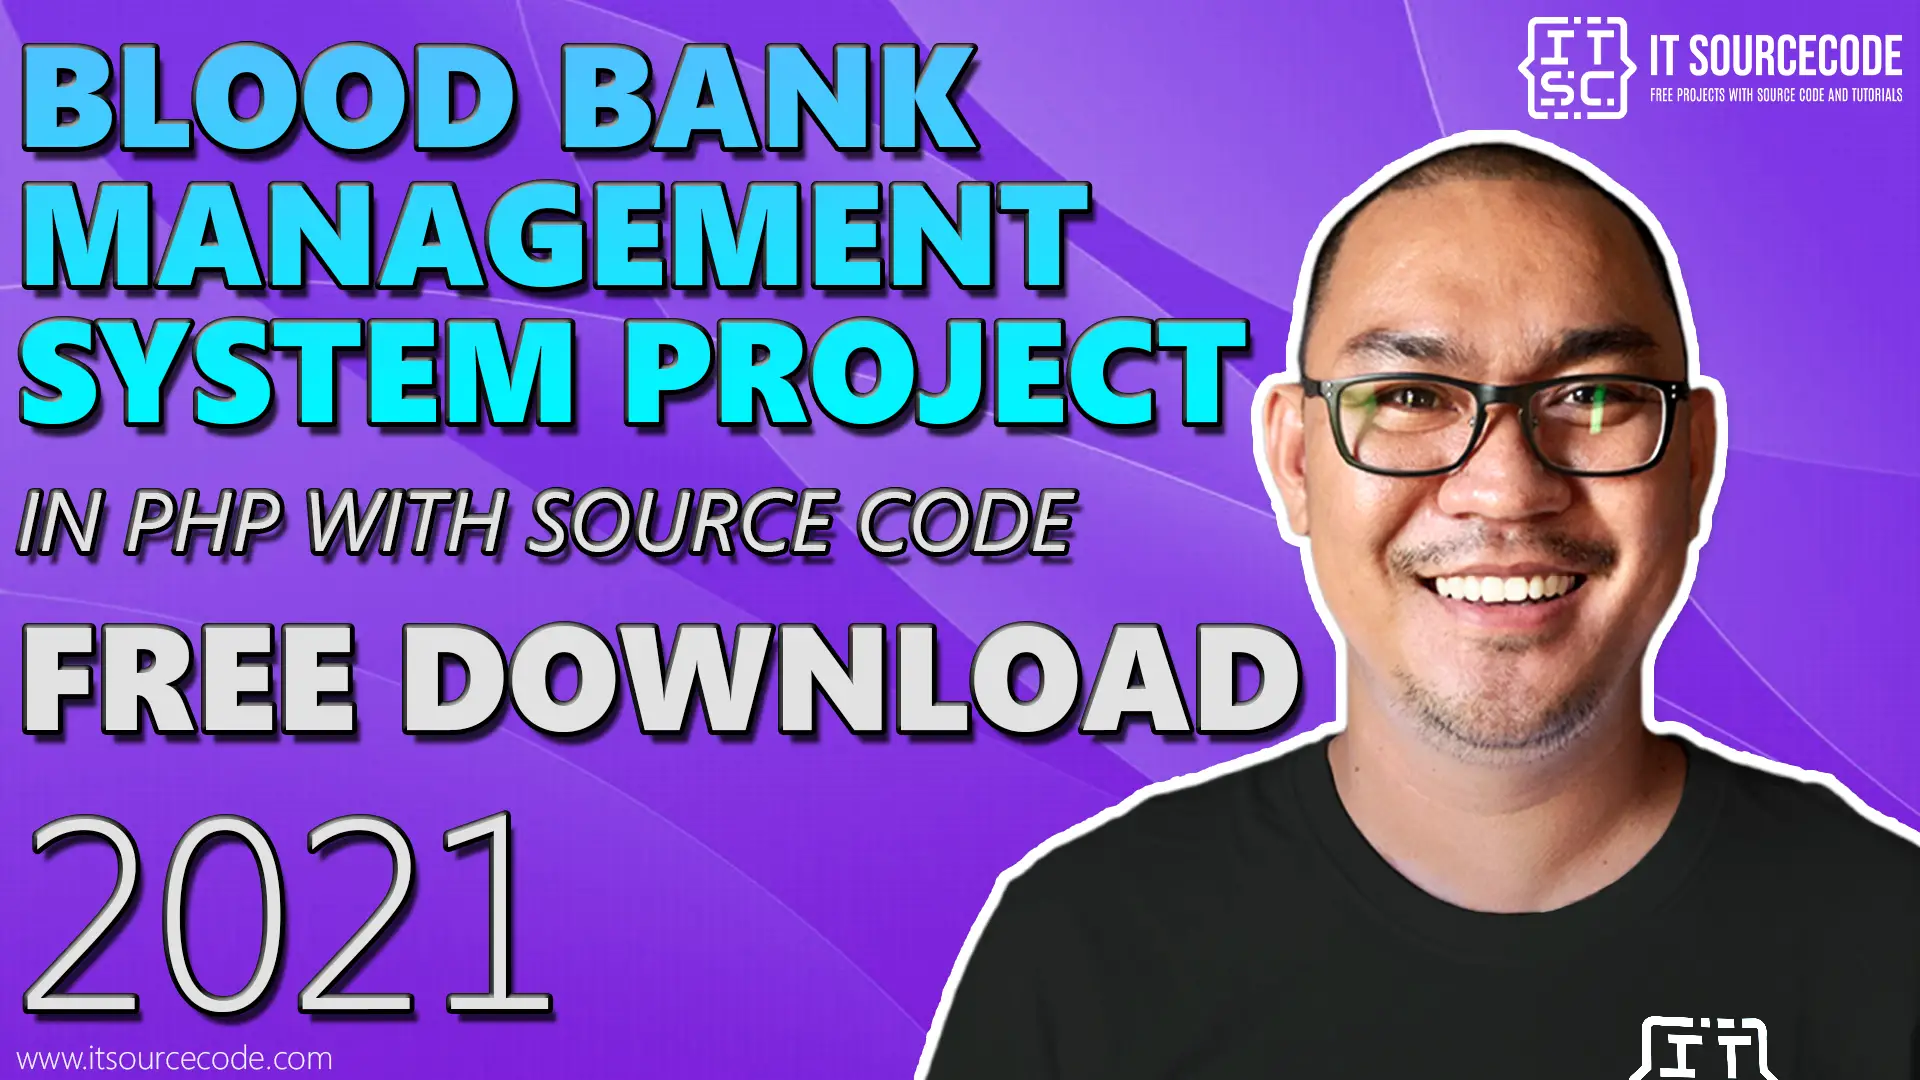 blood bank management system project in php with source code free download